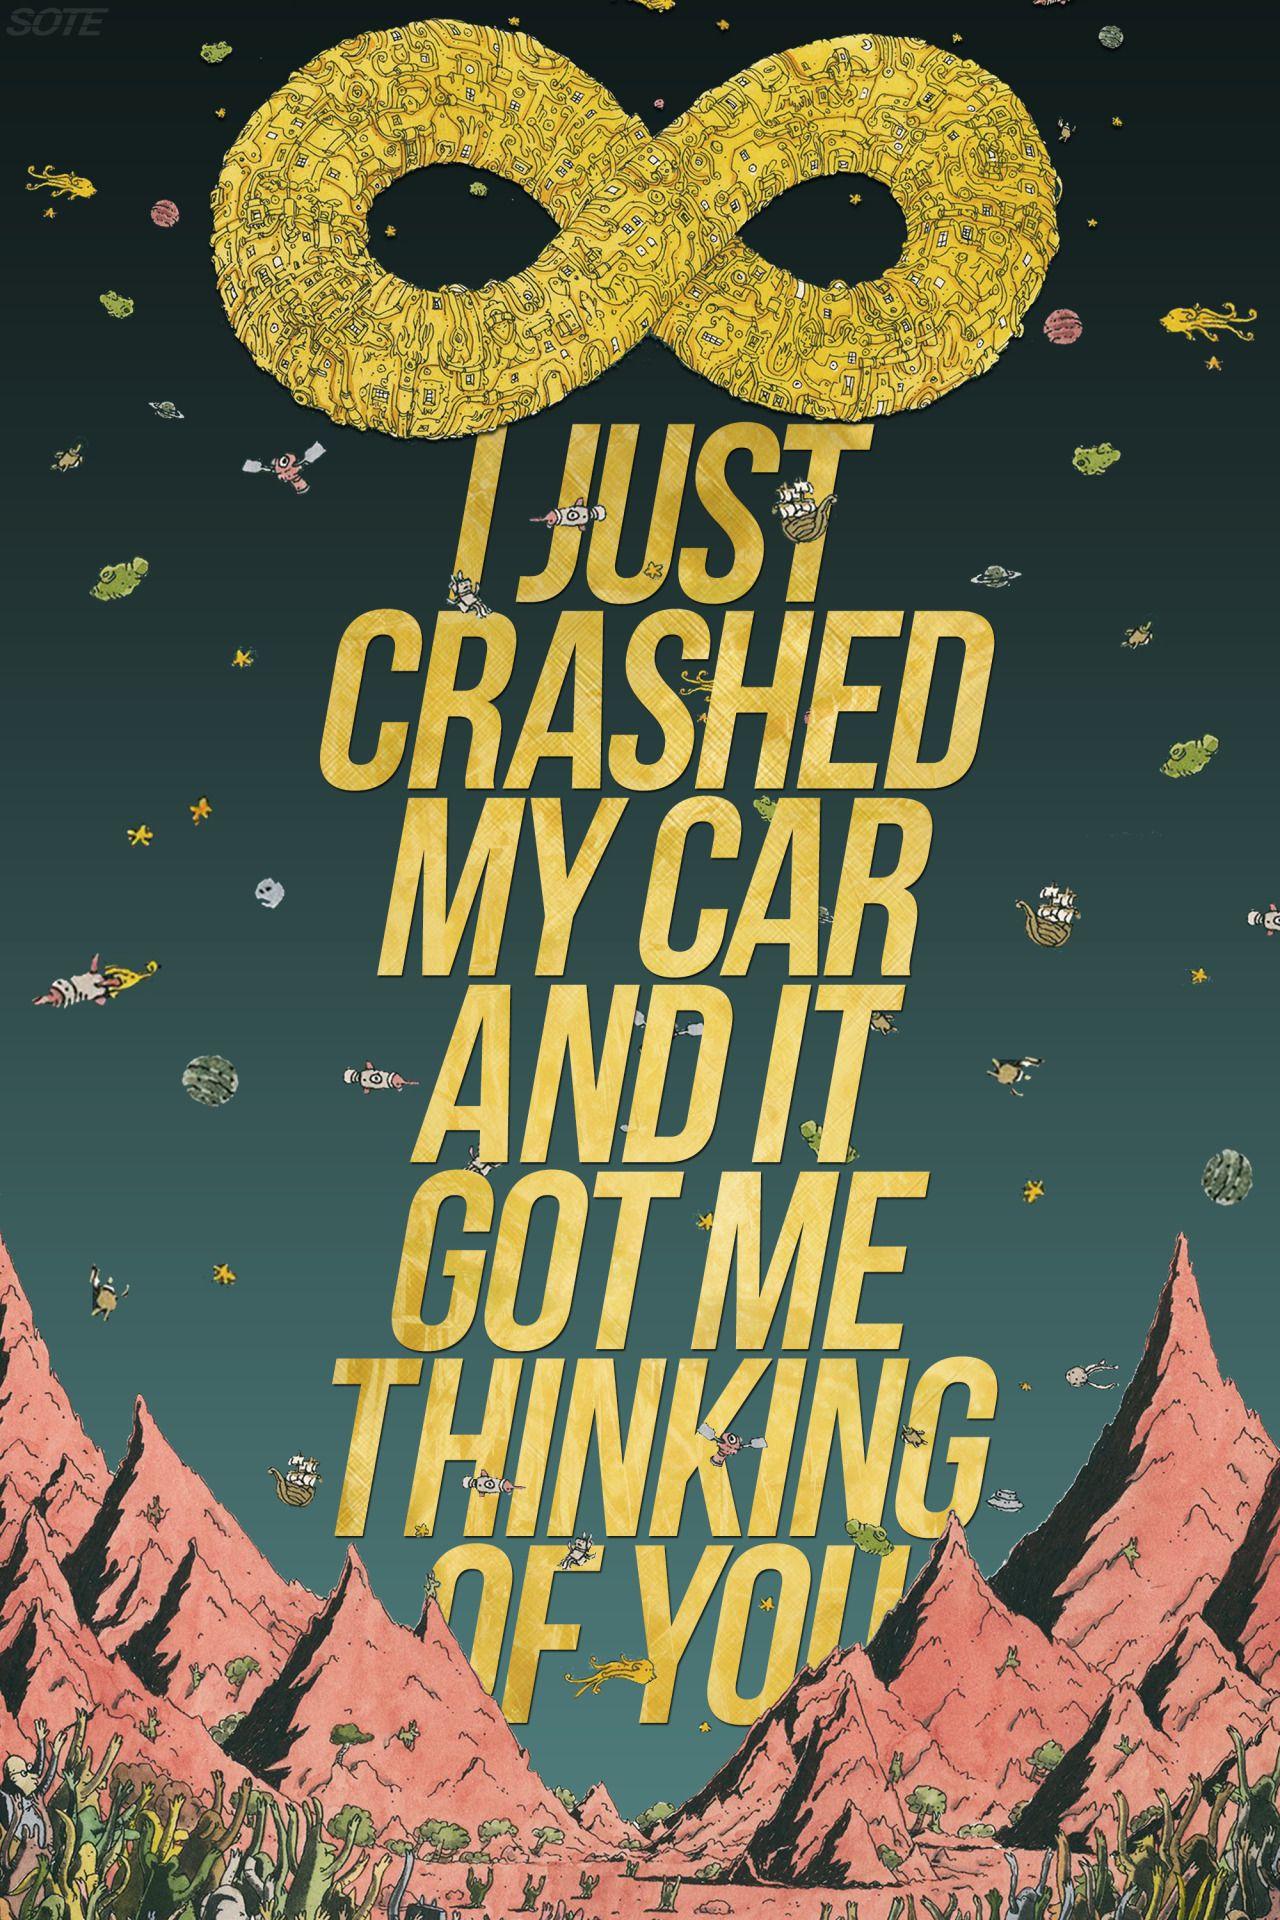 Dance Gavin Dance by the Game. / quote \